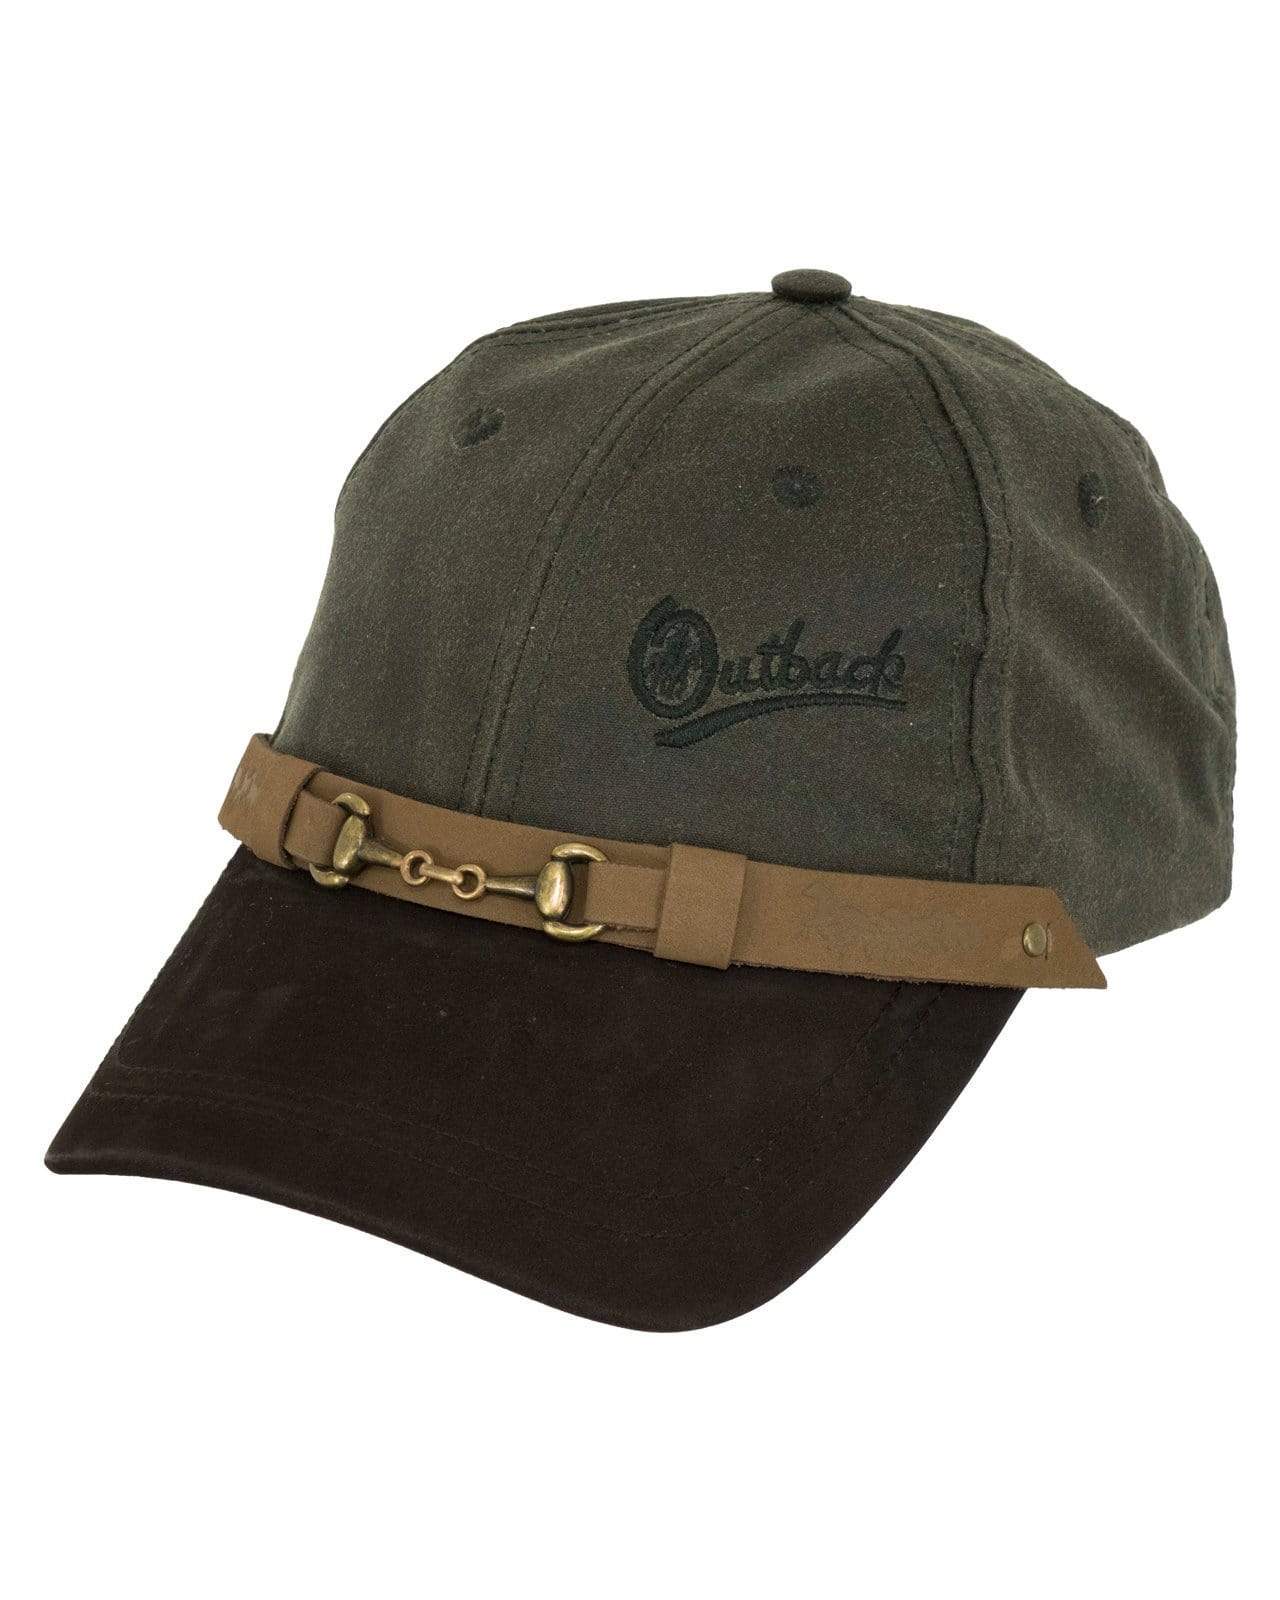 Outback Trading Company Equestrian Cap Sage / ONE 1482-SAG-ONE 089043328982 Hats